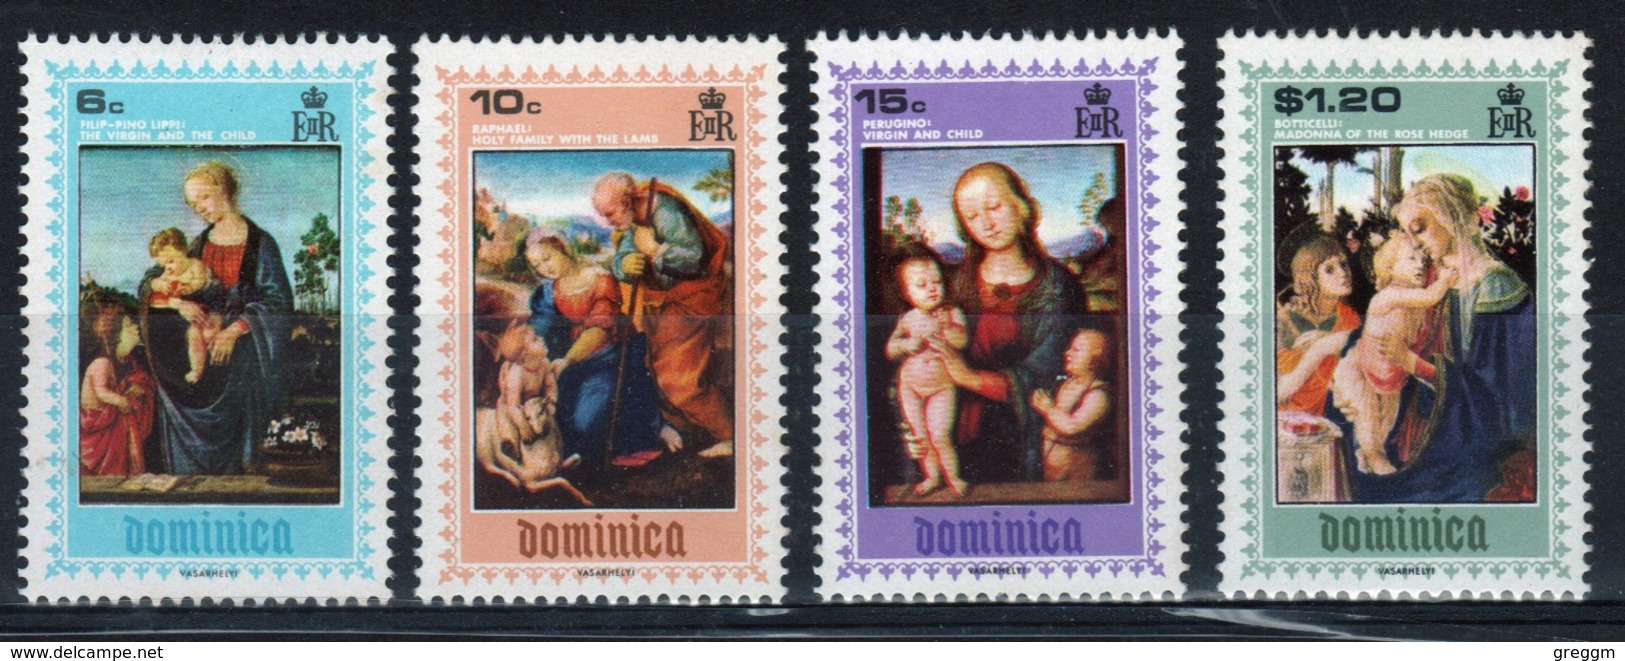 Dominica Set Of Stamps To Celebrate Christmas 1969. - Dominica (...-1978)